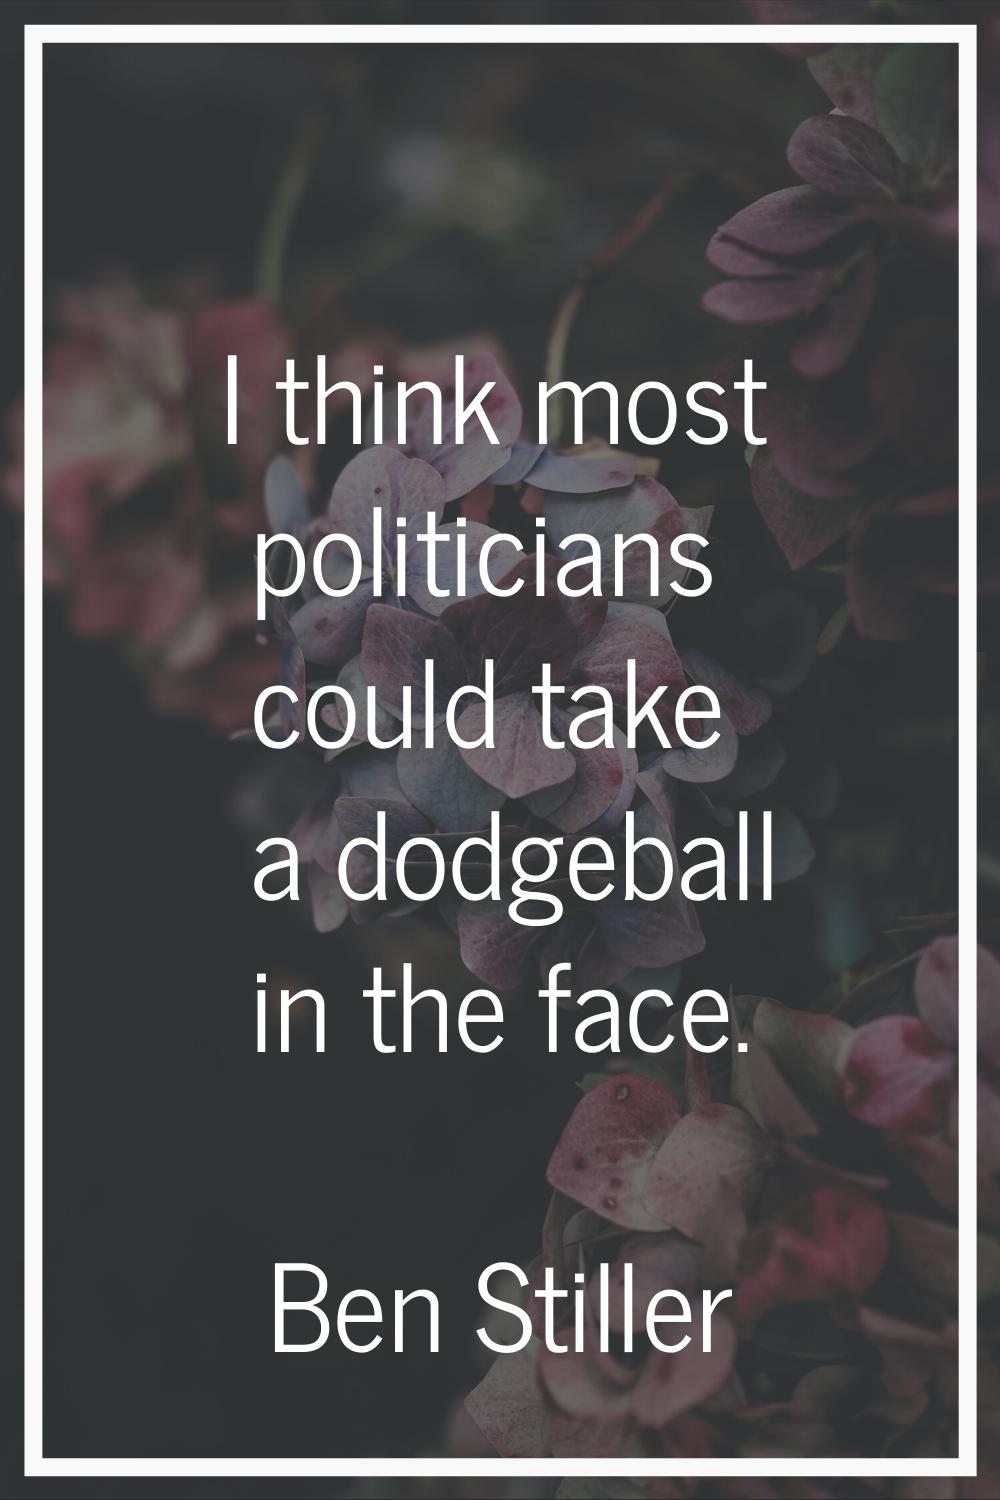 I think most politicians could take a dodgeball in the face.